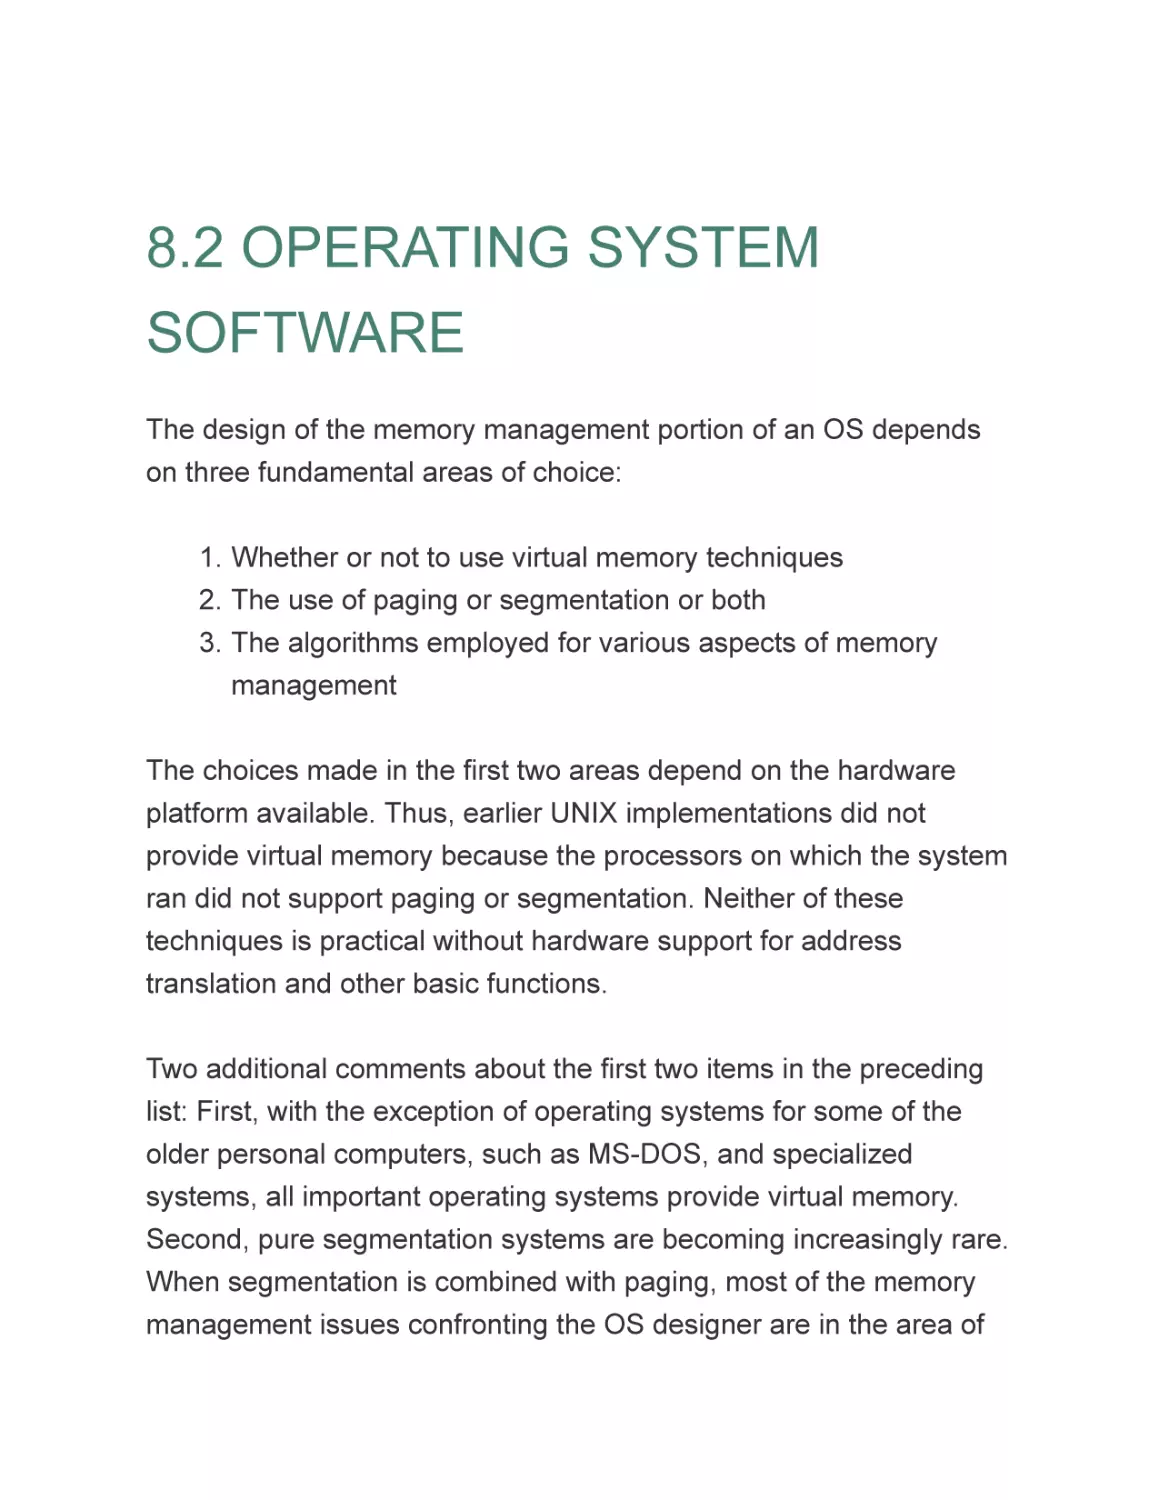 8.2 OPERATING SYSTEM SOFTWARE